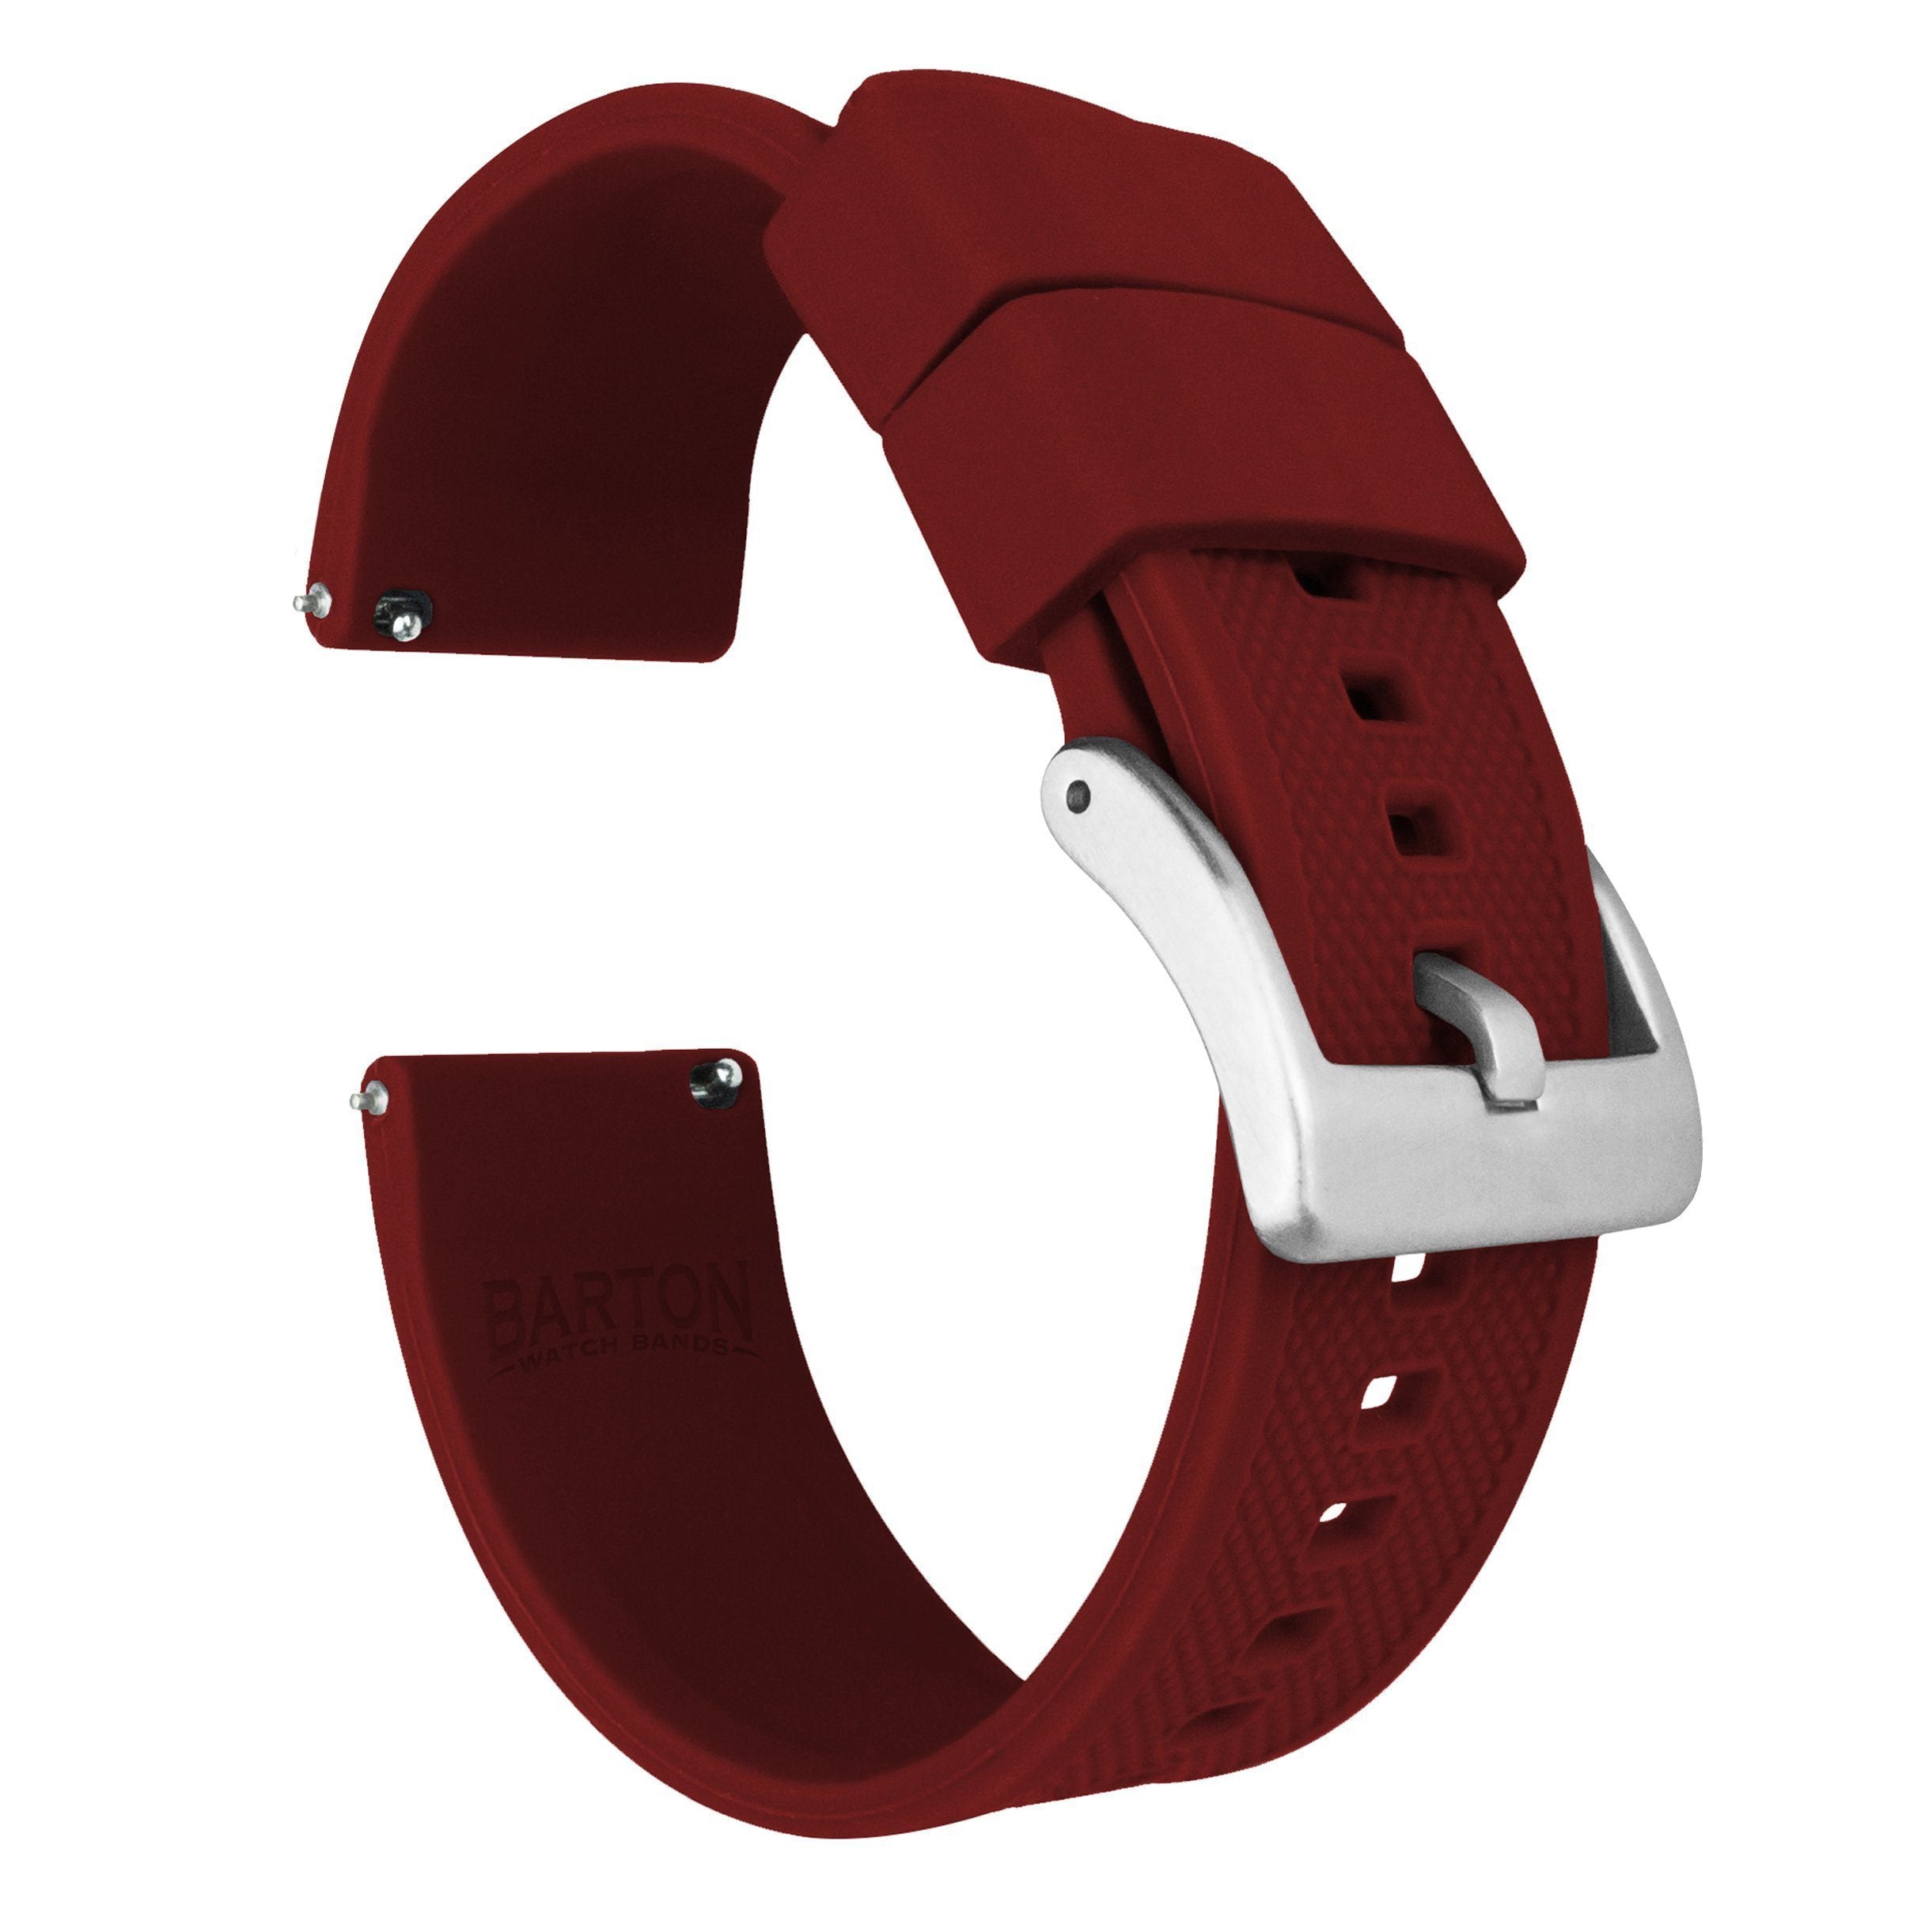 Silicone Watch Band / Strap for Apple Watch in Crimson Red w/ Stainless Steel Buckle | Barton